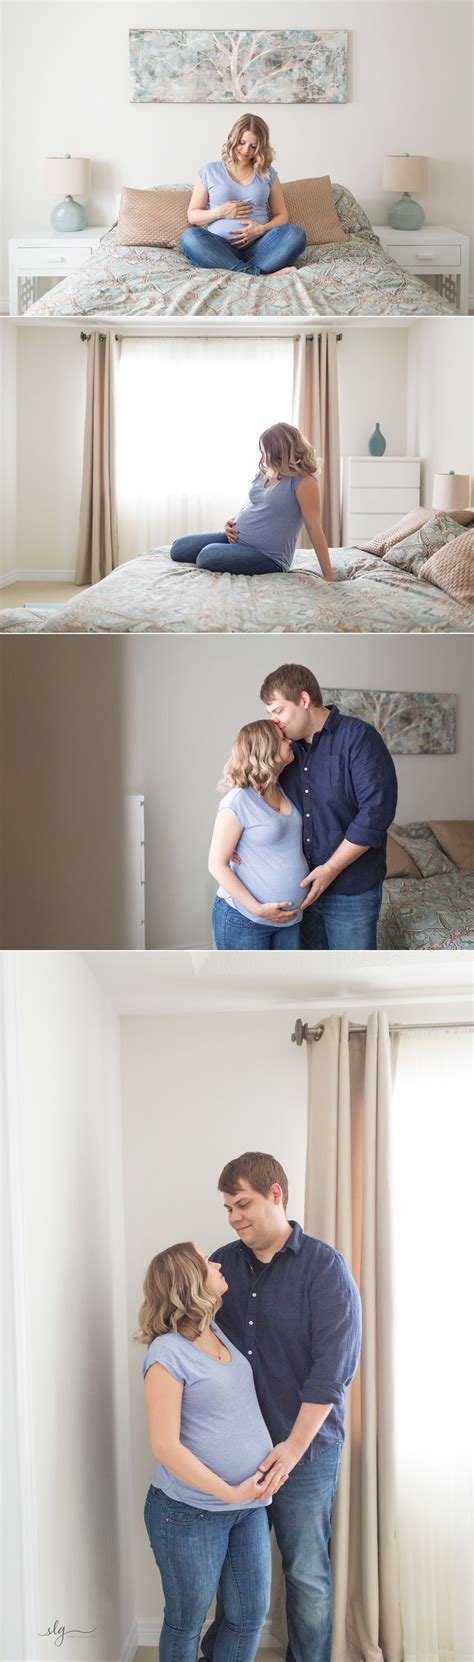 In Home Maternity Session Lifestyle Maternity Photography Slg